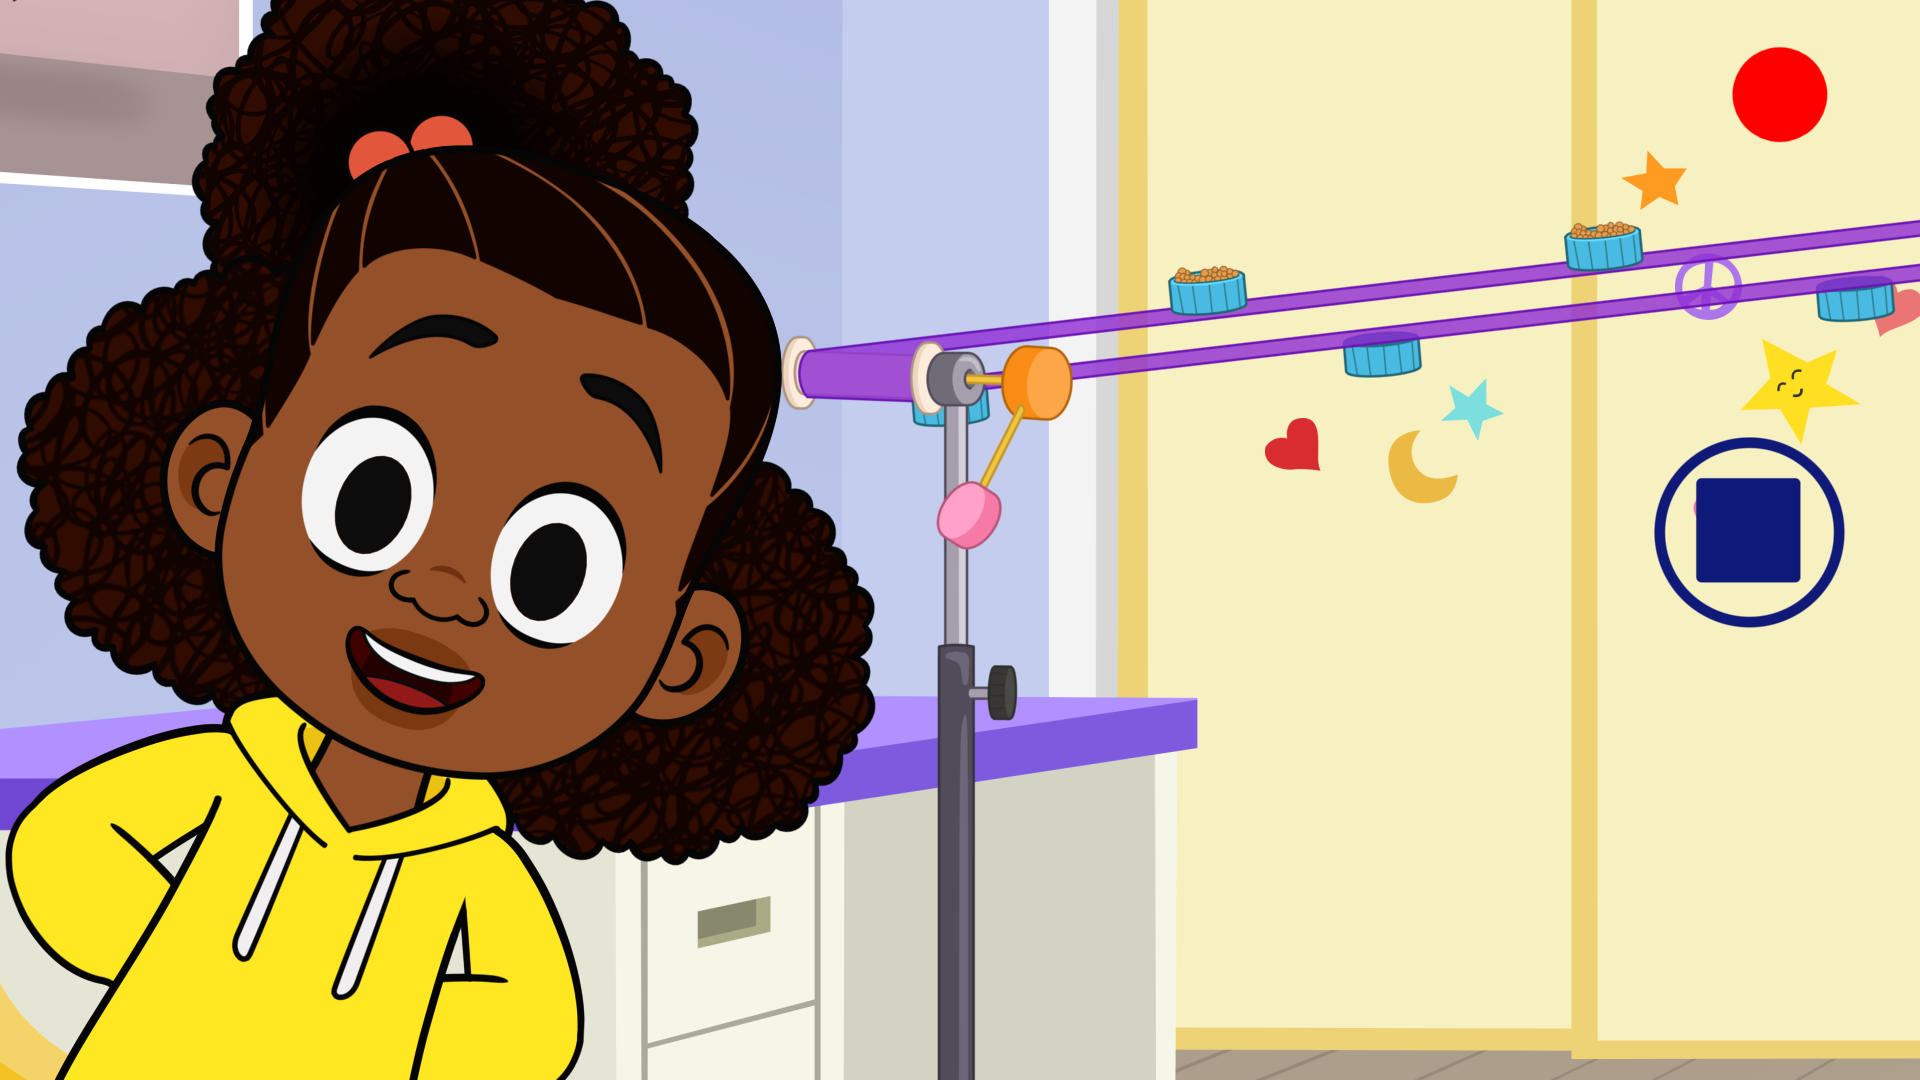 Cartoon image of a young Black girl wearing a yellow sweatshirt and smiling at the camera next to a display of planets and stars.